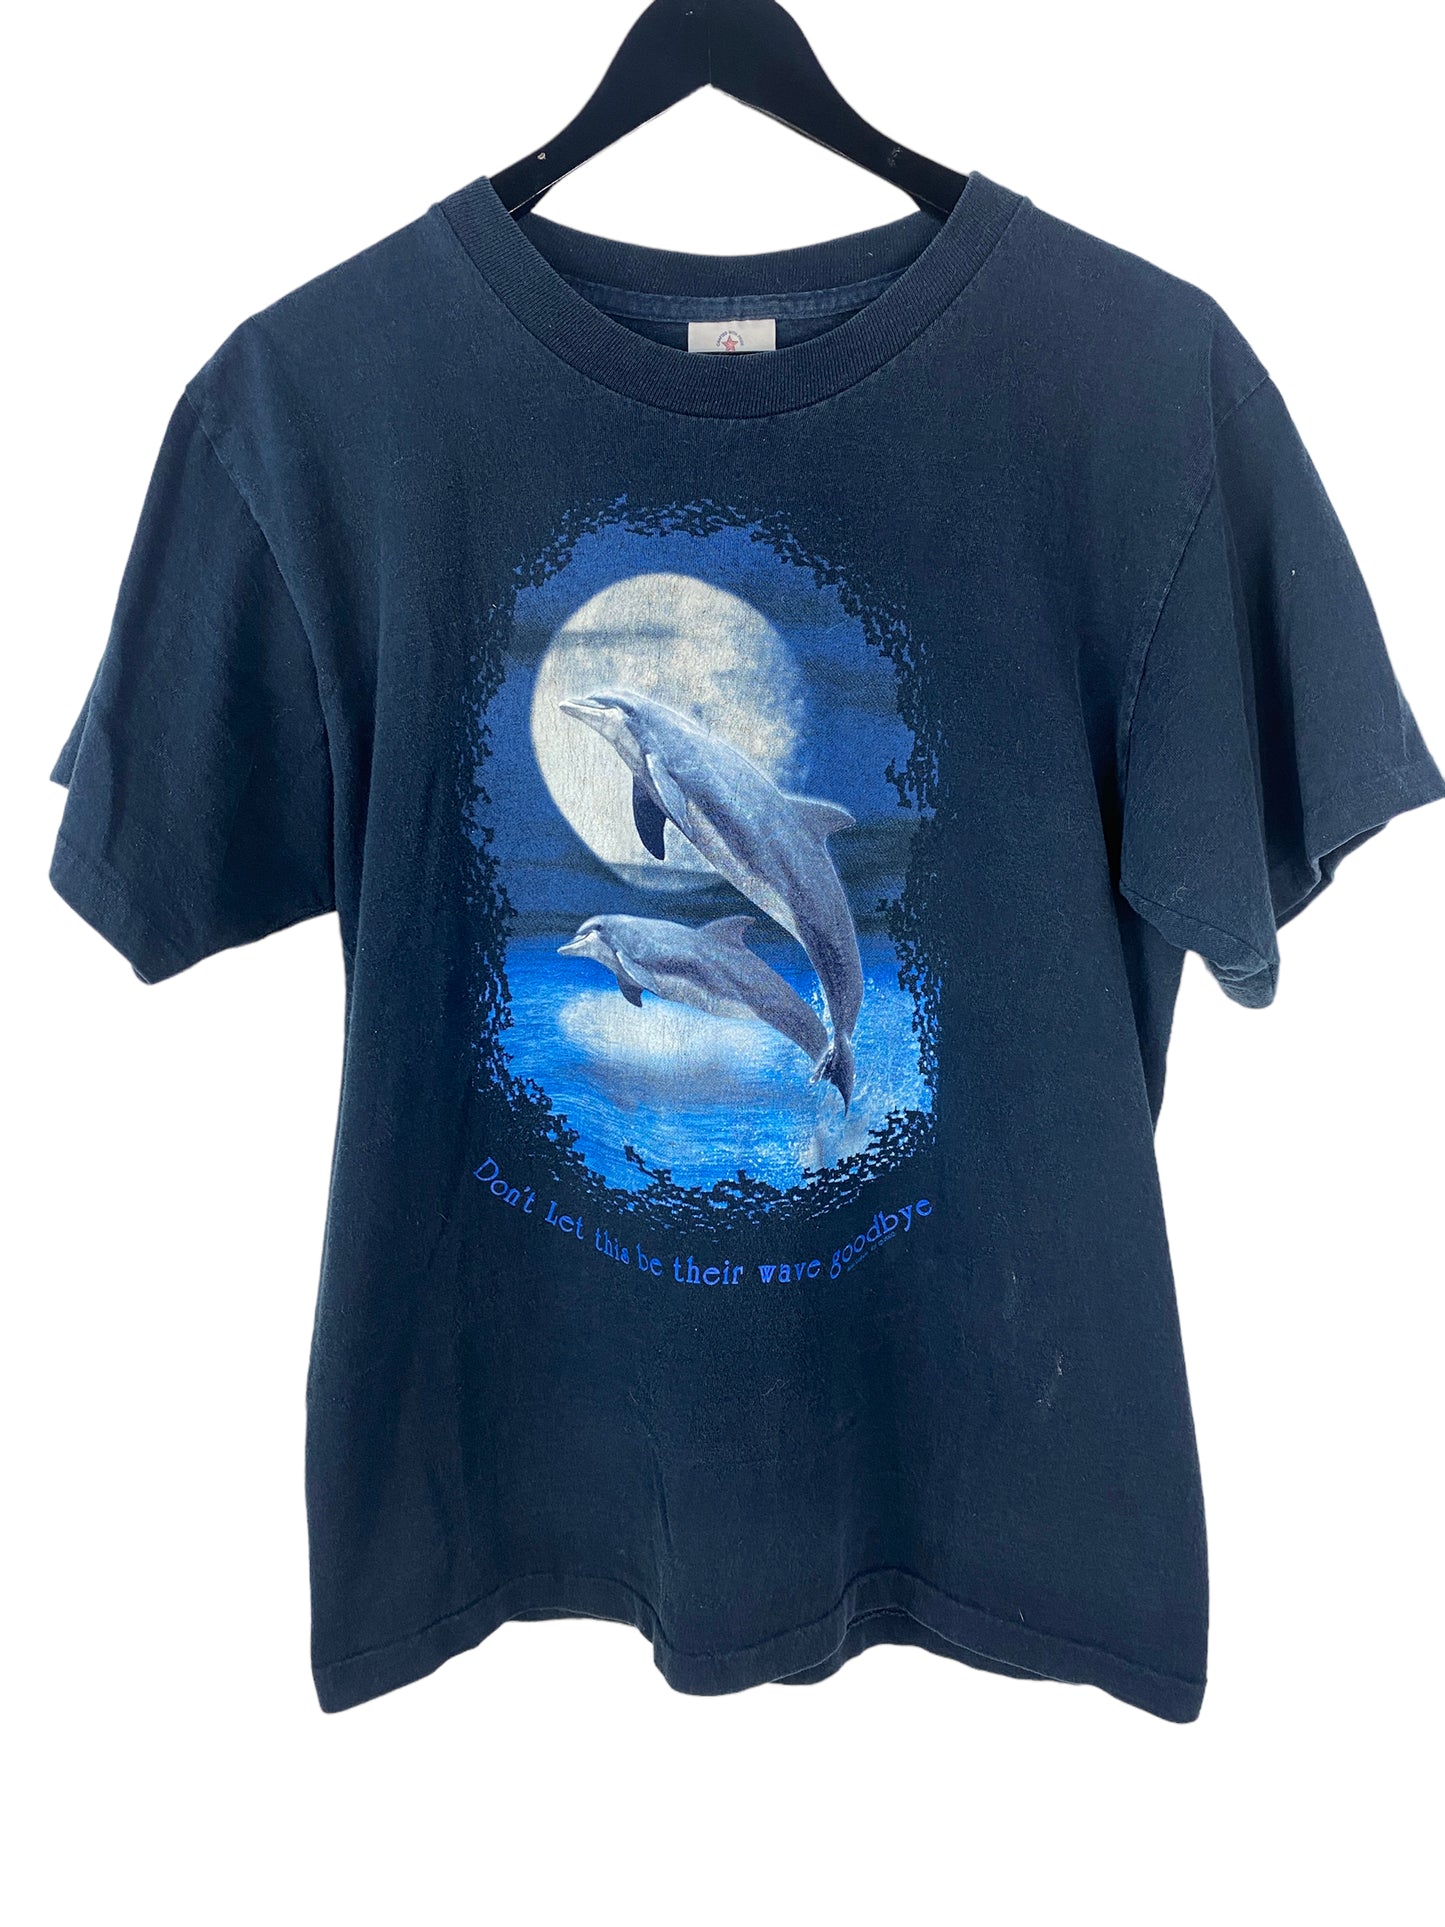 Load image into Gallery viewer, VTG Don’t Let This Be Their Wave Goodbye dolphin Tee Sz S
